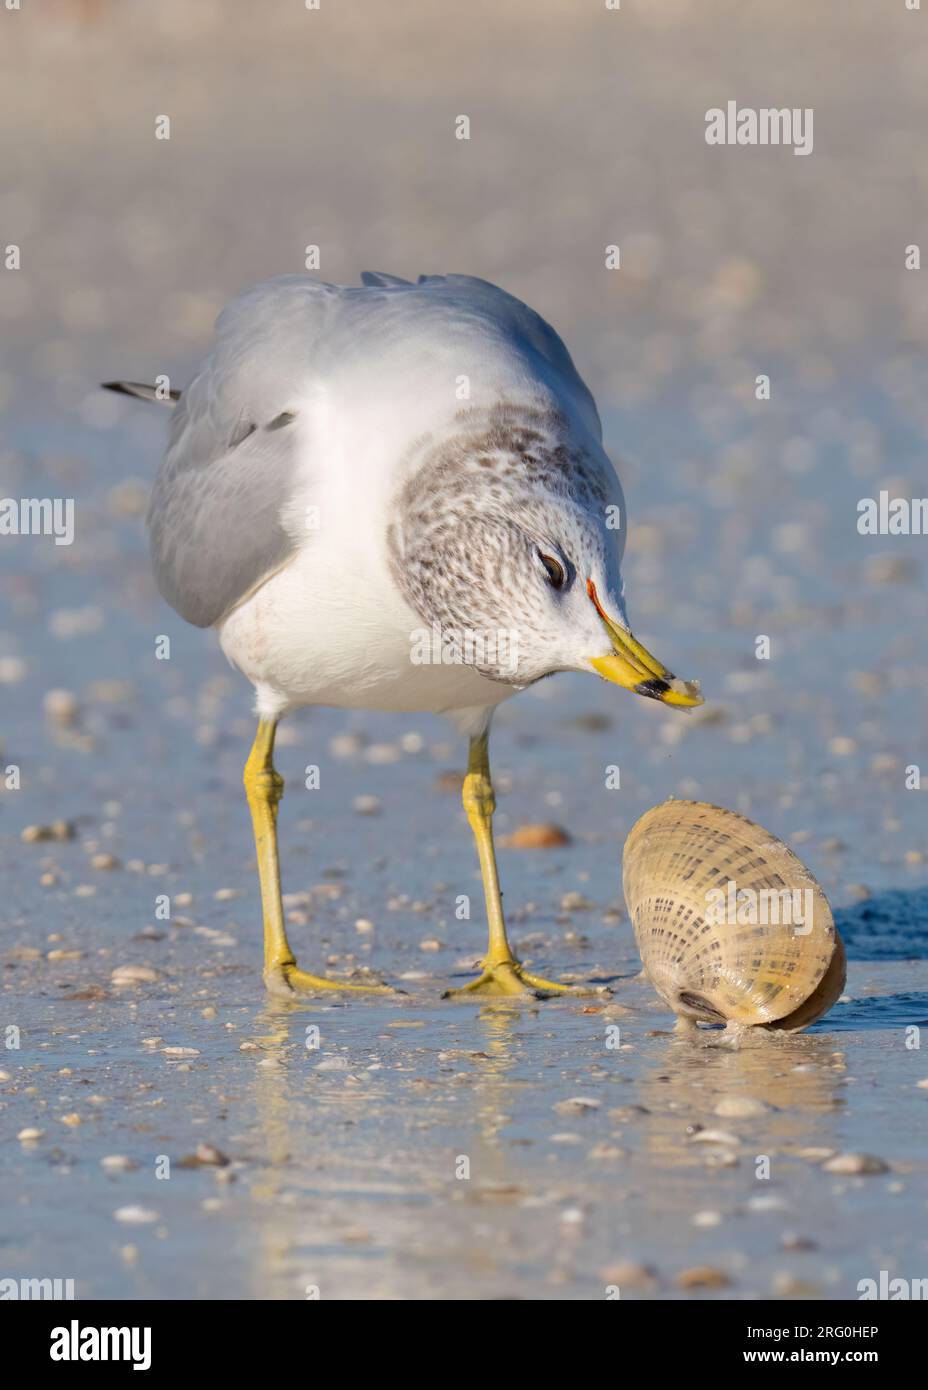 A ring-billed gull examines a sunray venus clam before attempting to break it open at Honeymoon Island State Park in Dunedin, Florida. Stock Photo